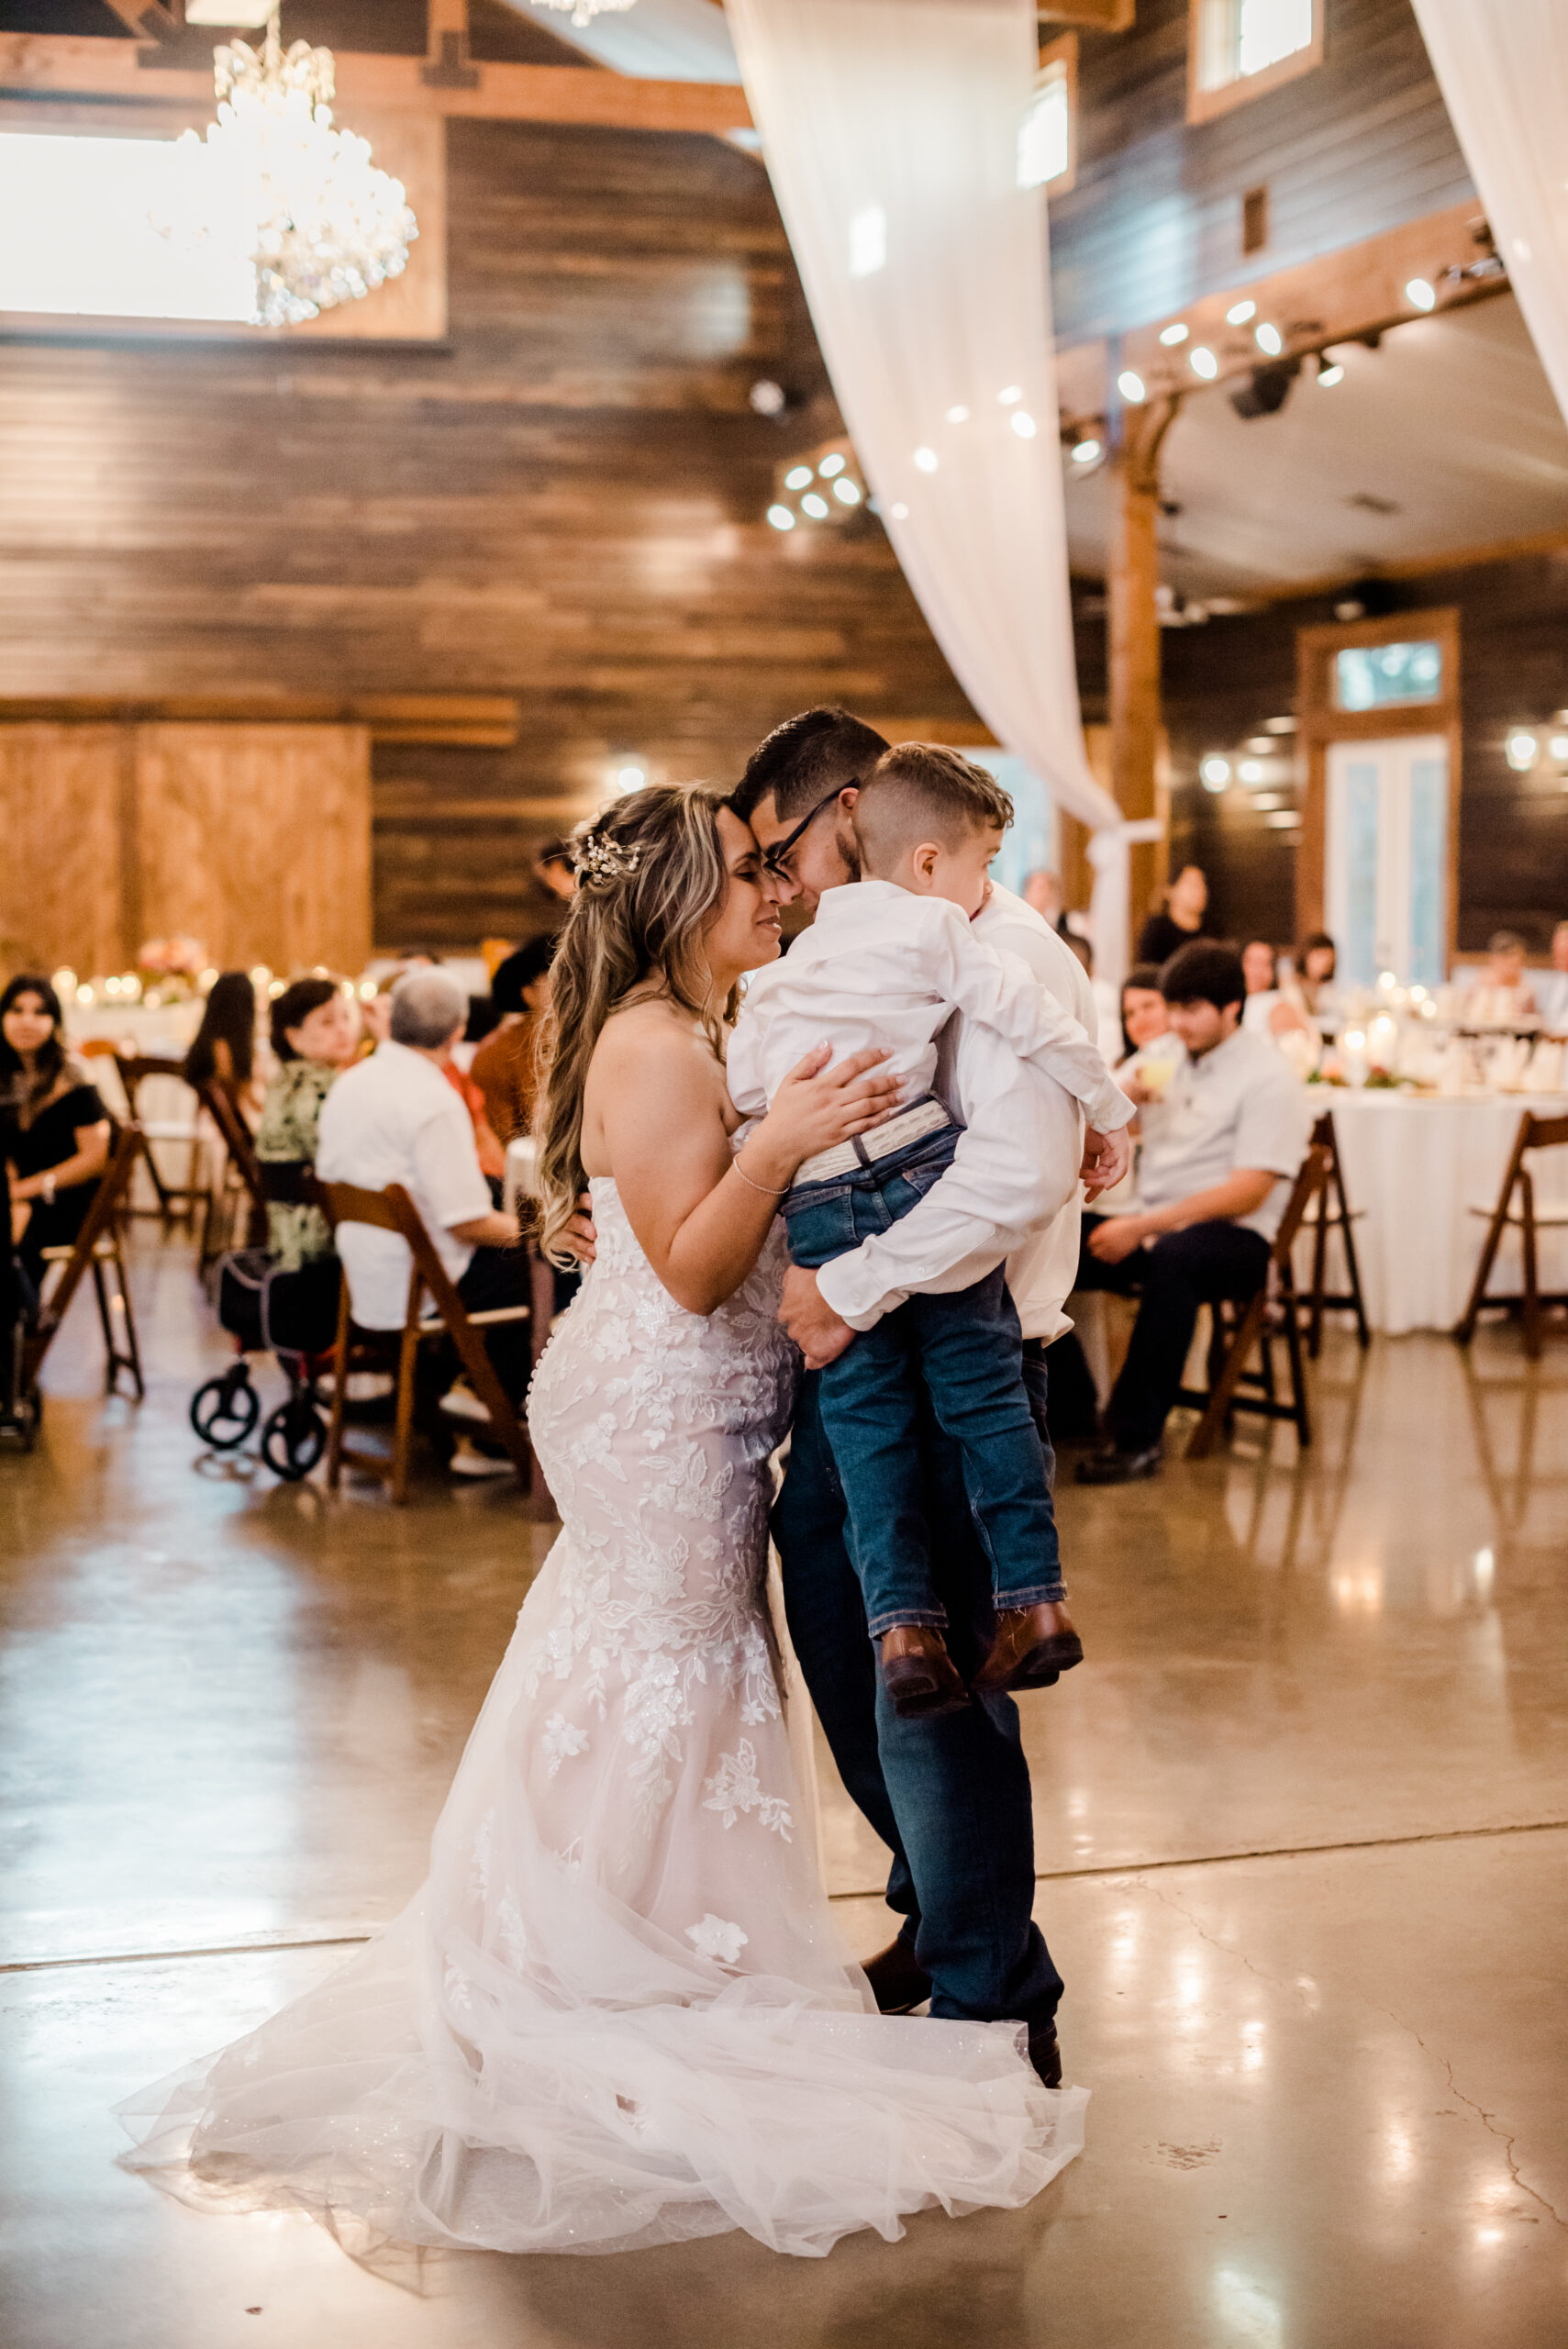 Jesenia and Lorenzo's Wedding at Peach Creek Ranch in College Station, Texas with Rachel Driskell Photography